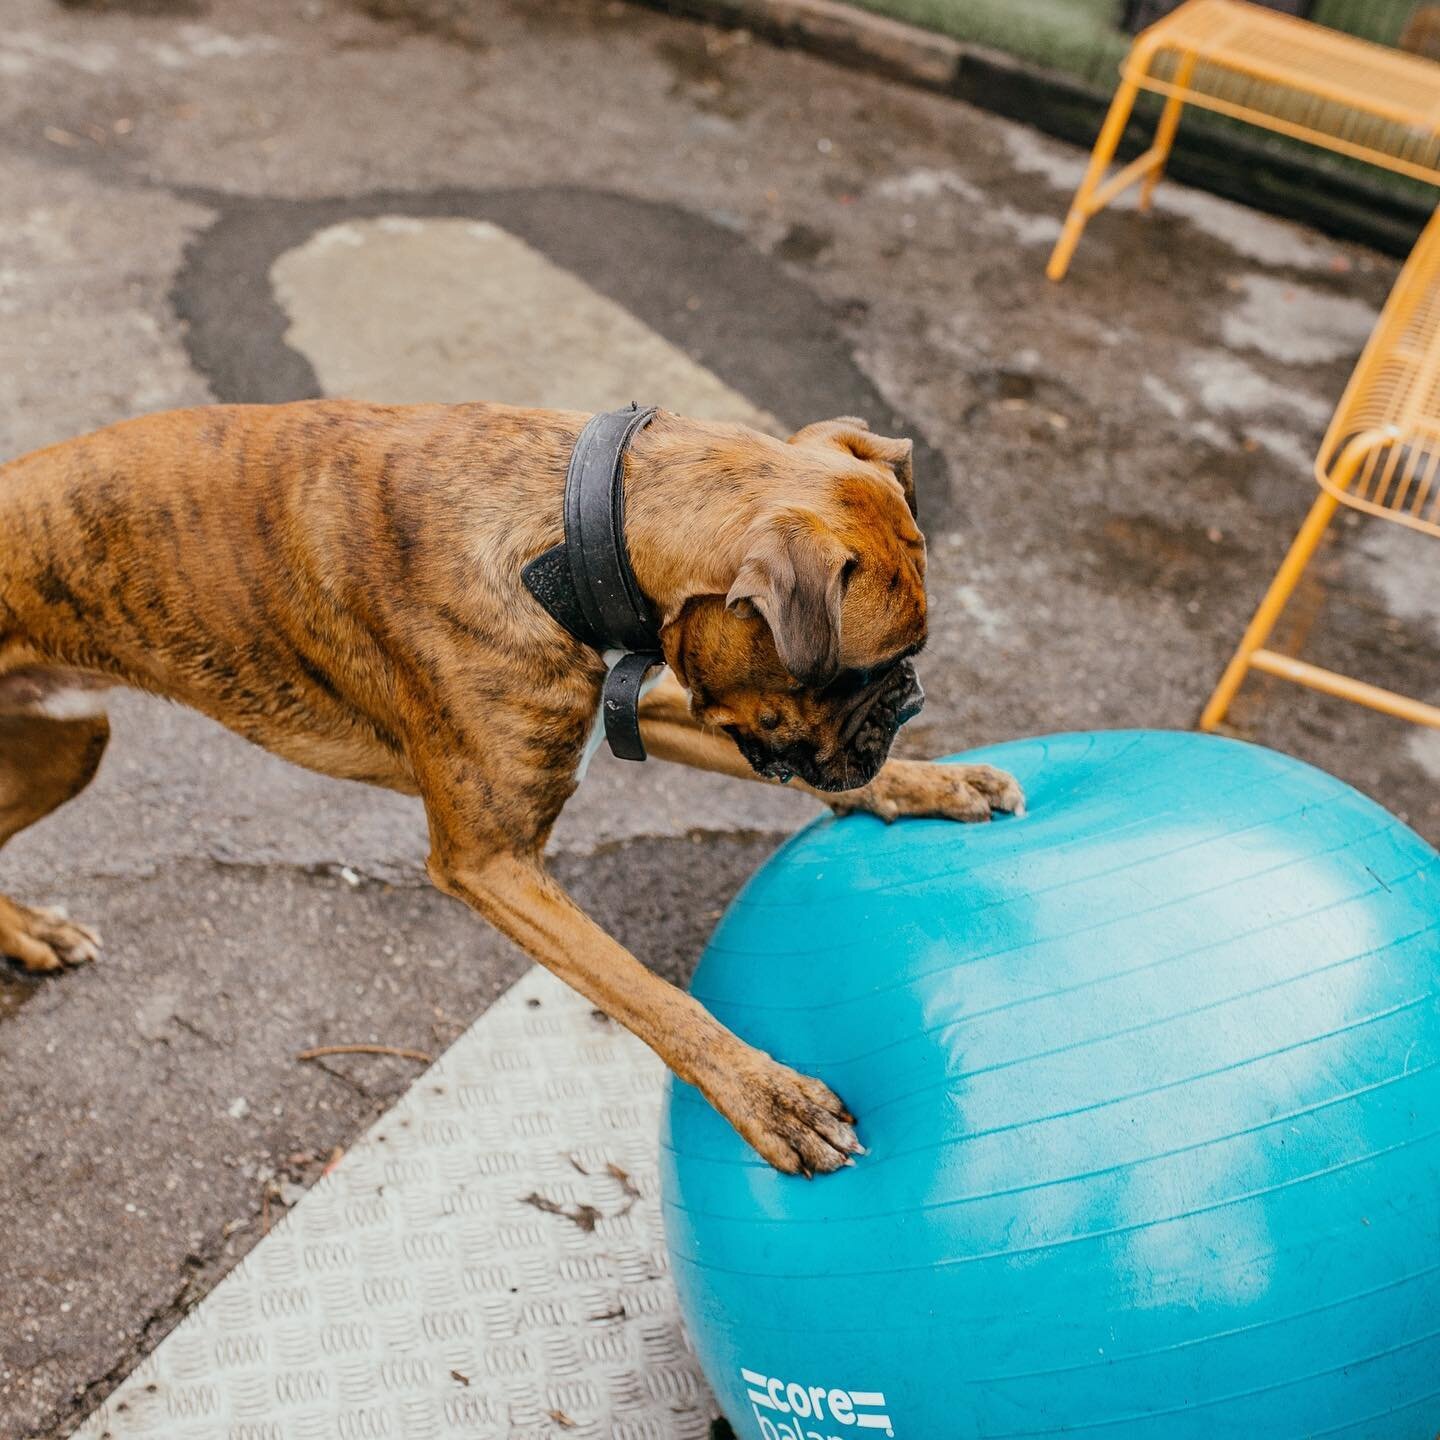 🎶 We like big balls and we can not lie - You other brothers can't deny 🥎 🏀 ⚾⁠⠀
⁠⠀
Have a wonderful and fun weekend from us at Hairy Hounds in Hackney⁠⠀
⁠⠀
We've got that Friyay feeling!⁠⠀
⁠⠀
.⁠⠀
⁠⠀
If you would like to enquire about our training d